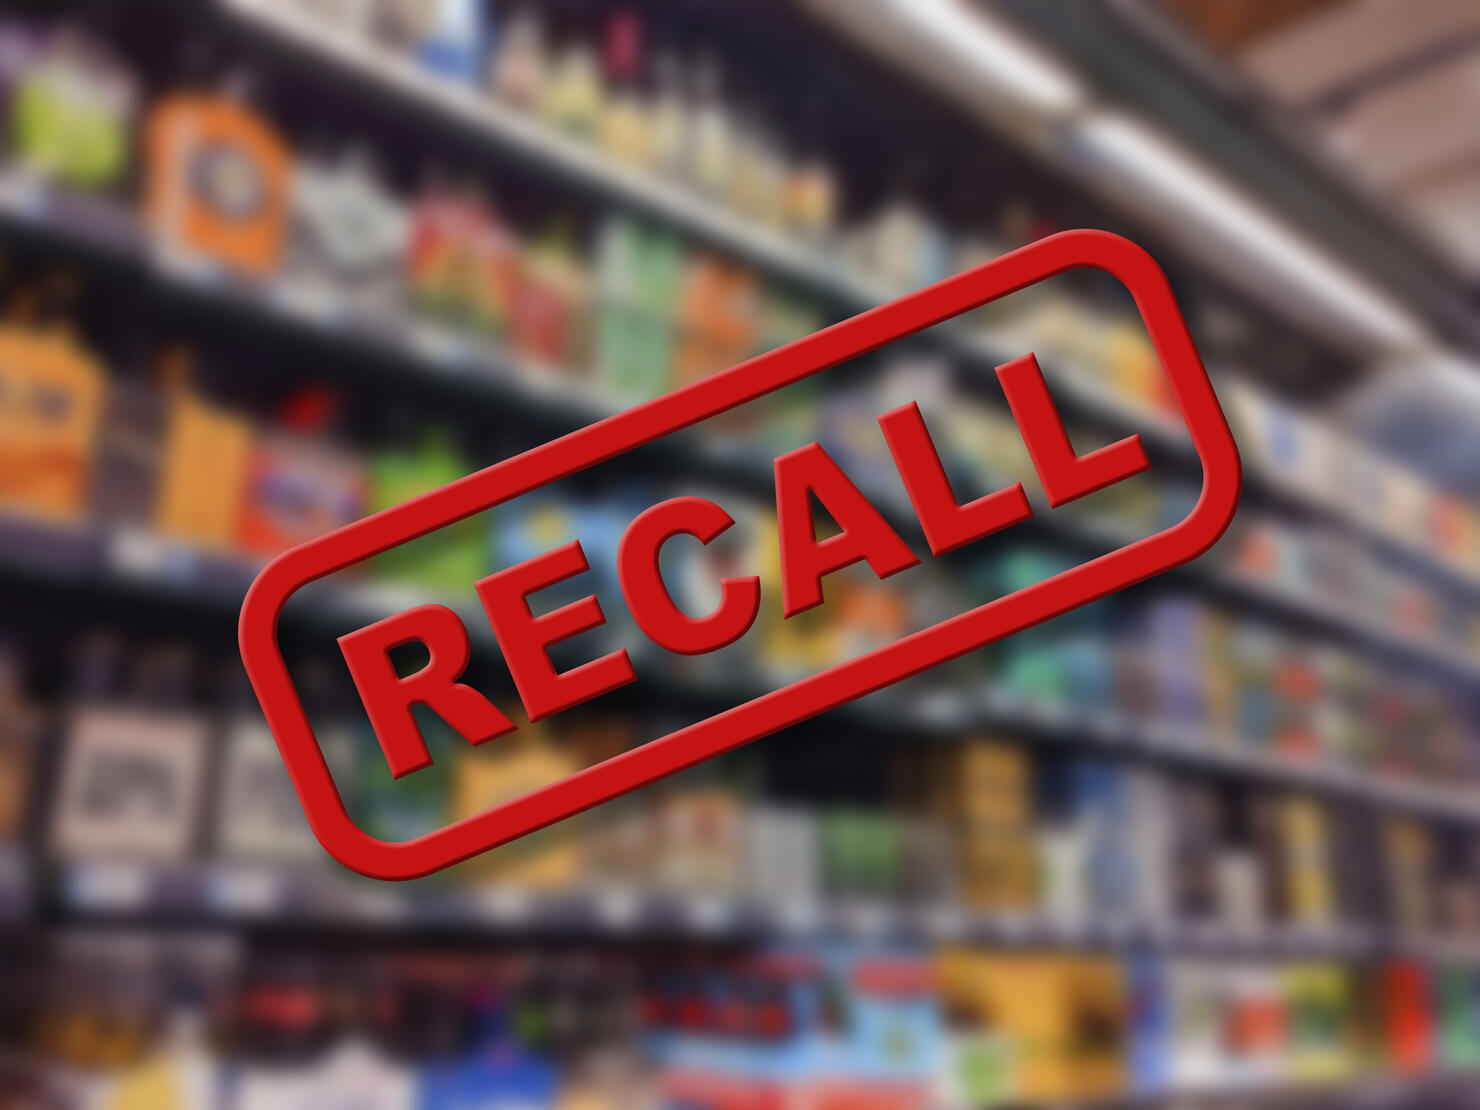 Blurry interior of a grocery store aisle behind large red Recall text